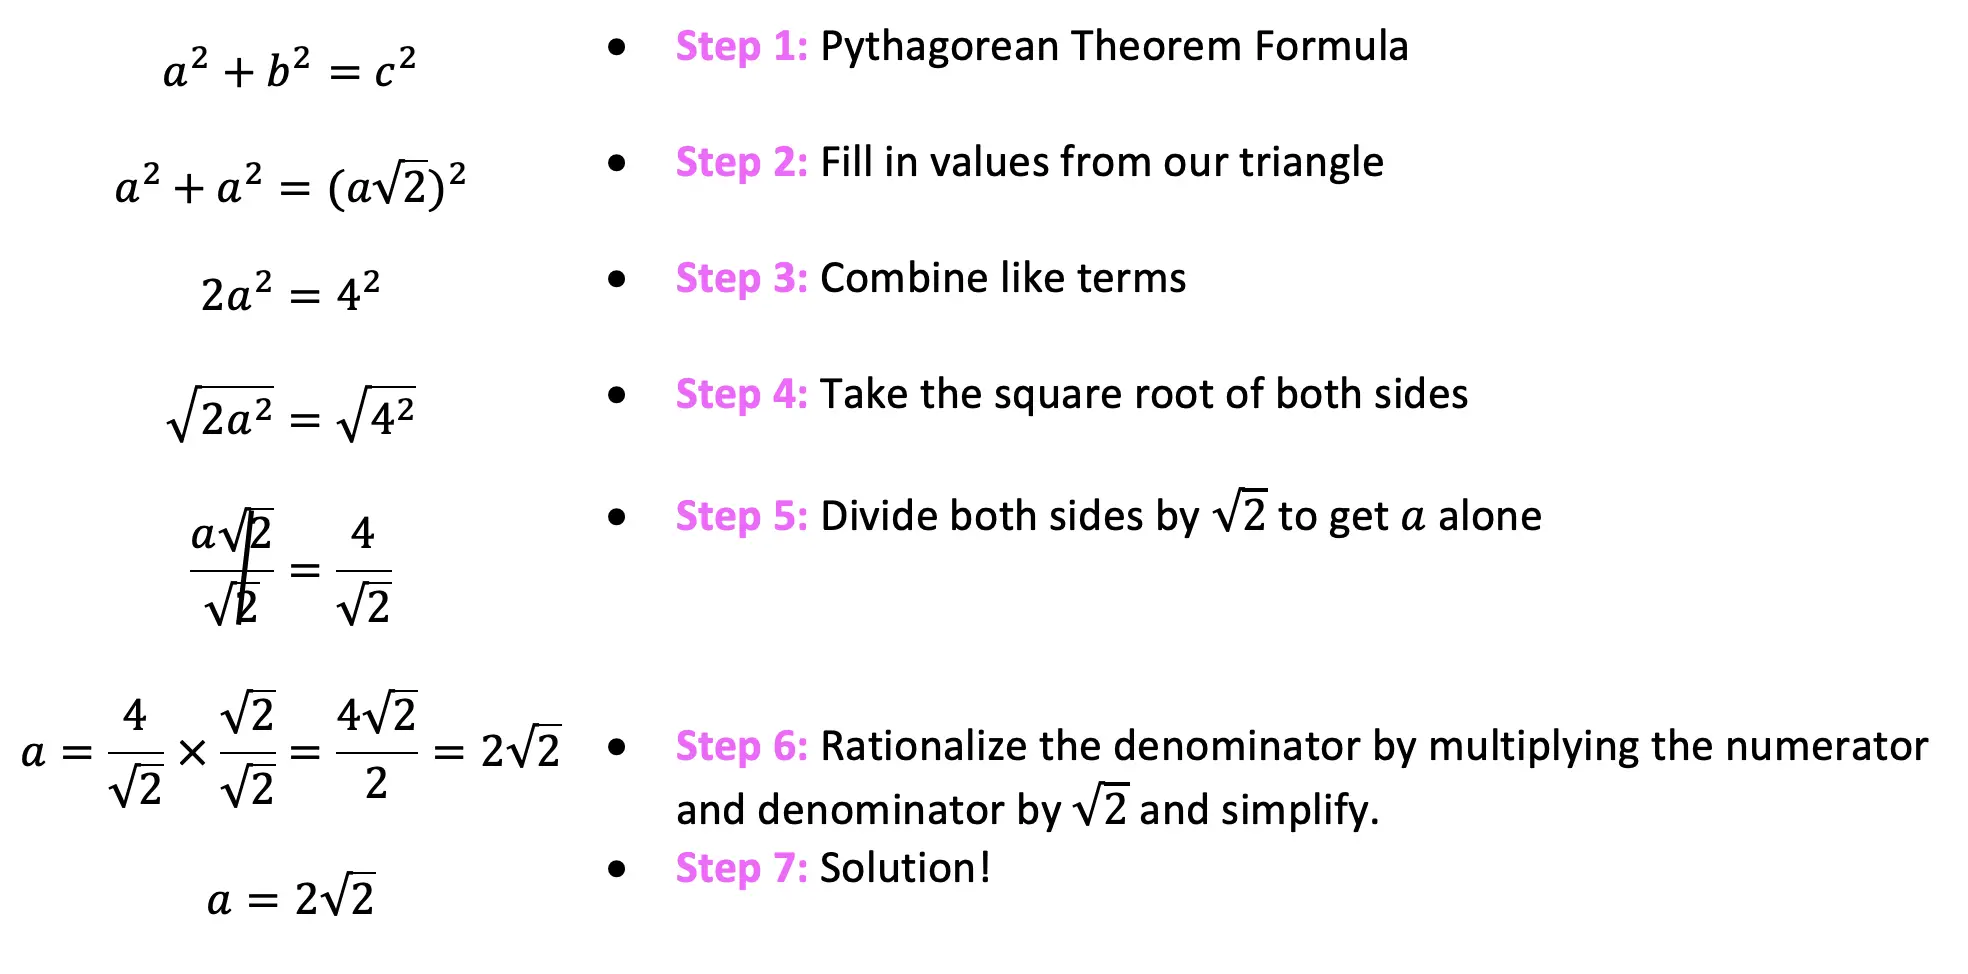 Write out the Pythagorean Theorem Formula
Fill in the values from our given 45 45 90 triangle based on the side lengths
Combine like terms a2 + a2 = 2a2 given.
Take the square root of both sides of the equation
Divide both sides by radical 2 to get a alone
Rationalize the denominator by multiplying the numerator and denominator by radical 2 and simplify

We have found our solution!